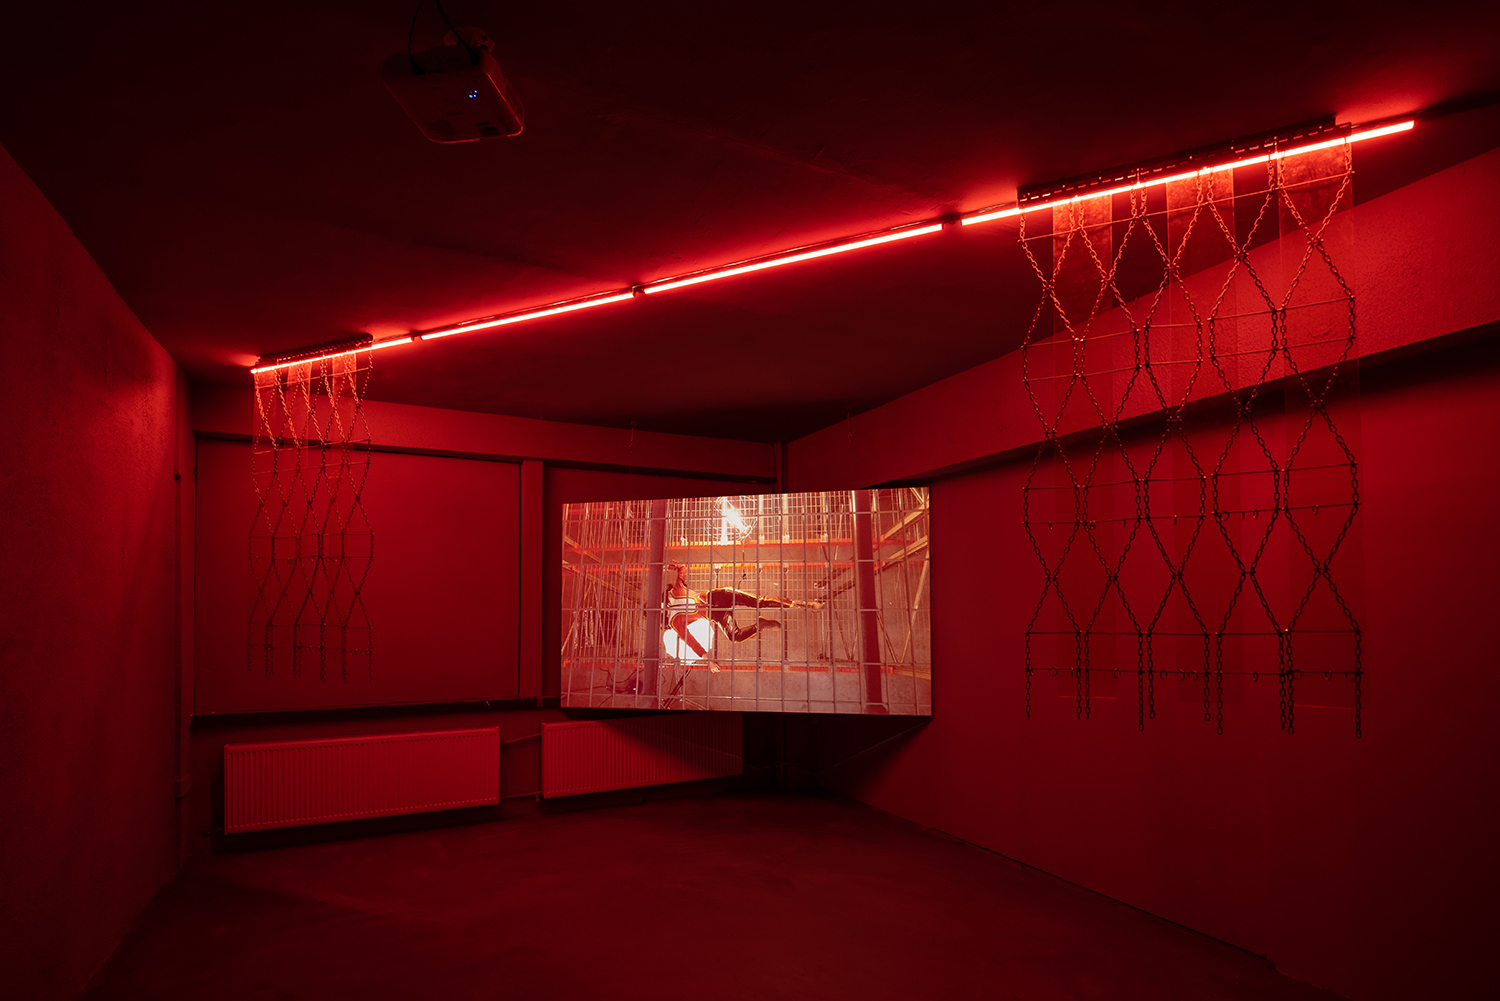 Catinca Malaimare, Emergency Ex, 2022, HD Single channel, 17mins 3s. Installation View. Photo by Catalin Georgescu